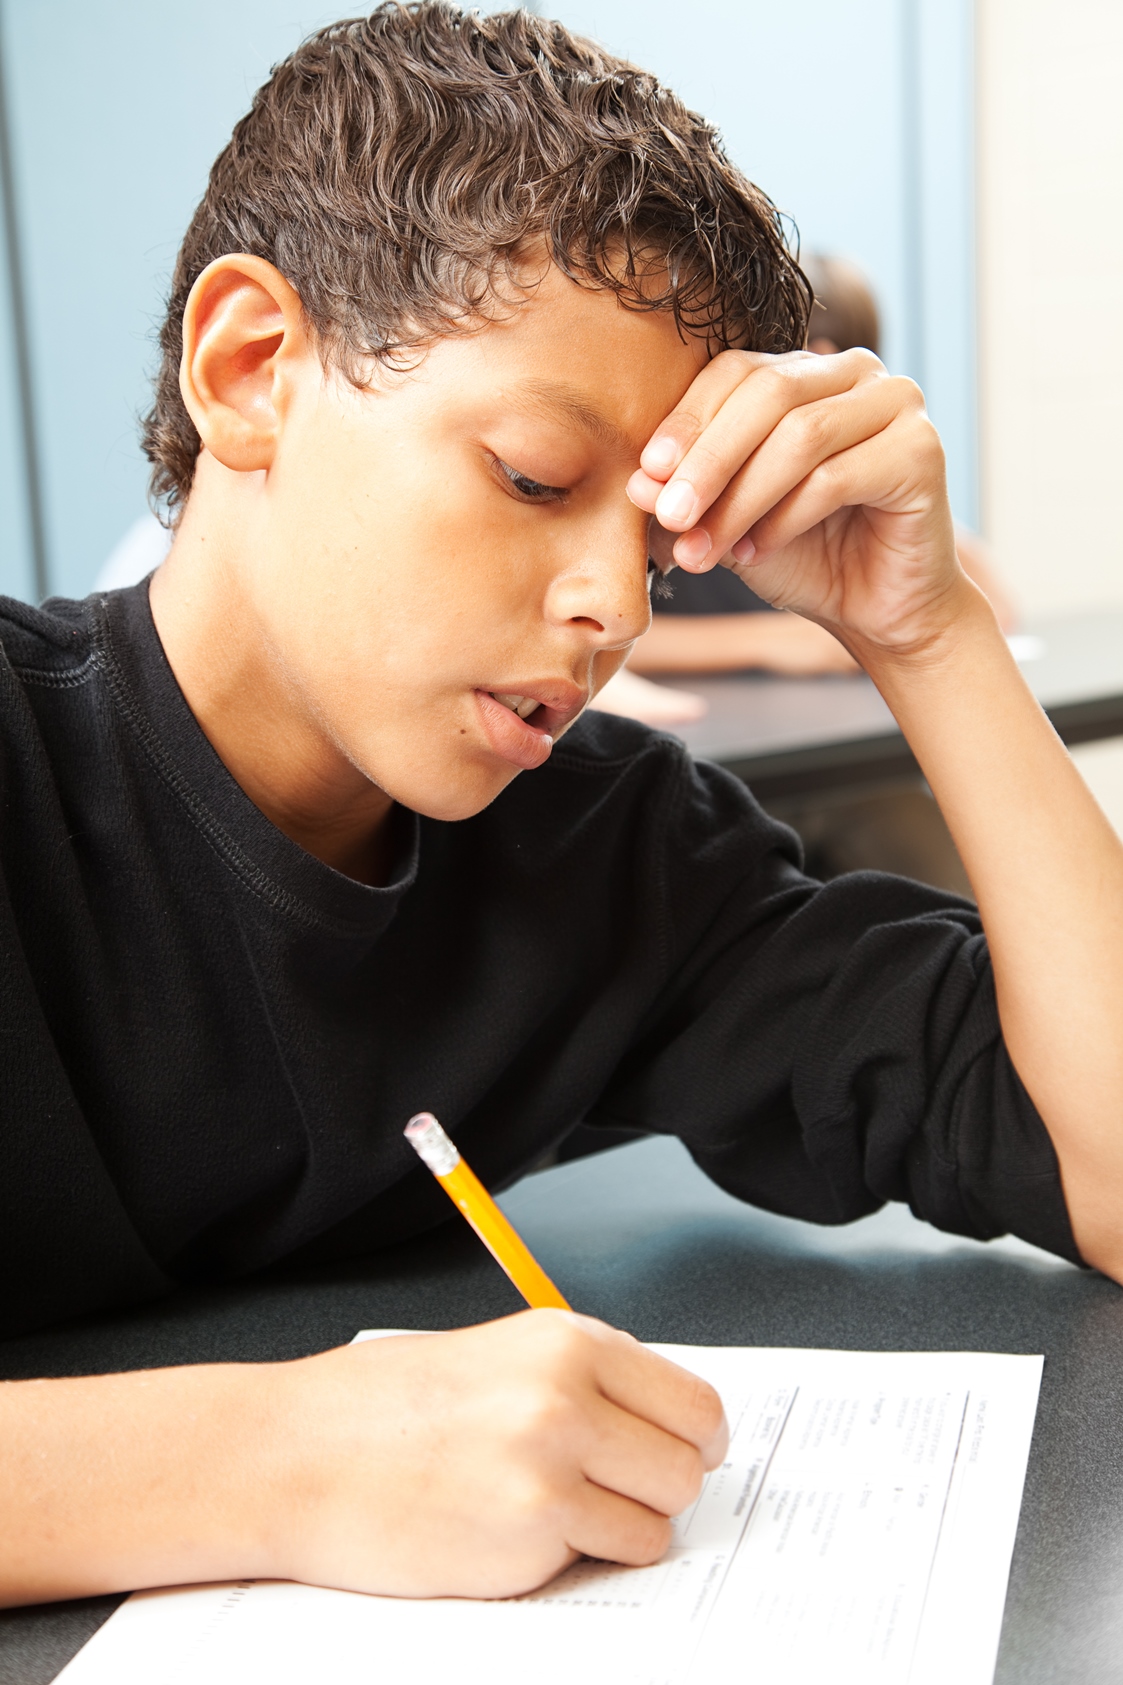 Stock photo showing school aged boy writing on school work and holding head with one hand